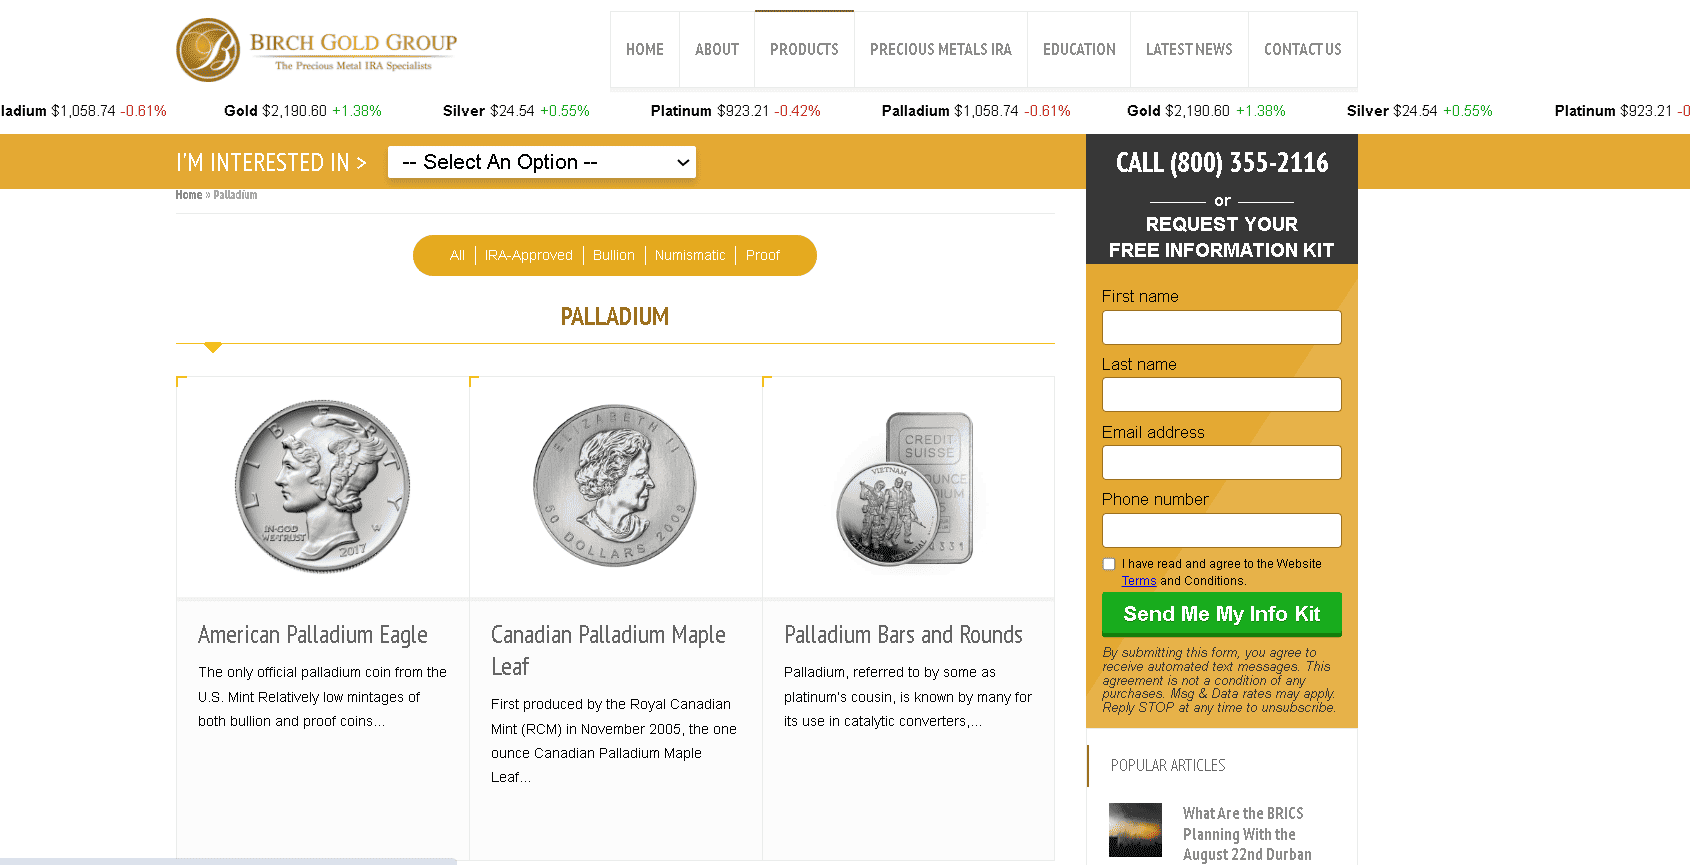 Birch Gold Group sell palladium coins and bars